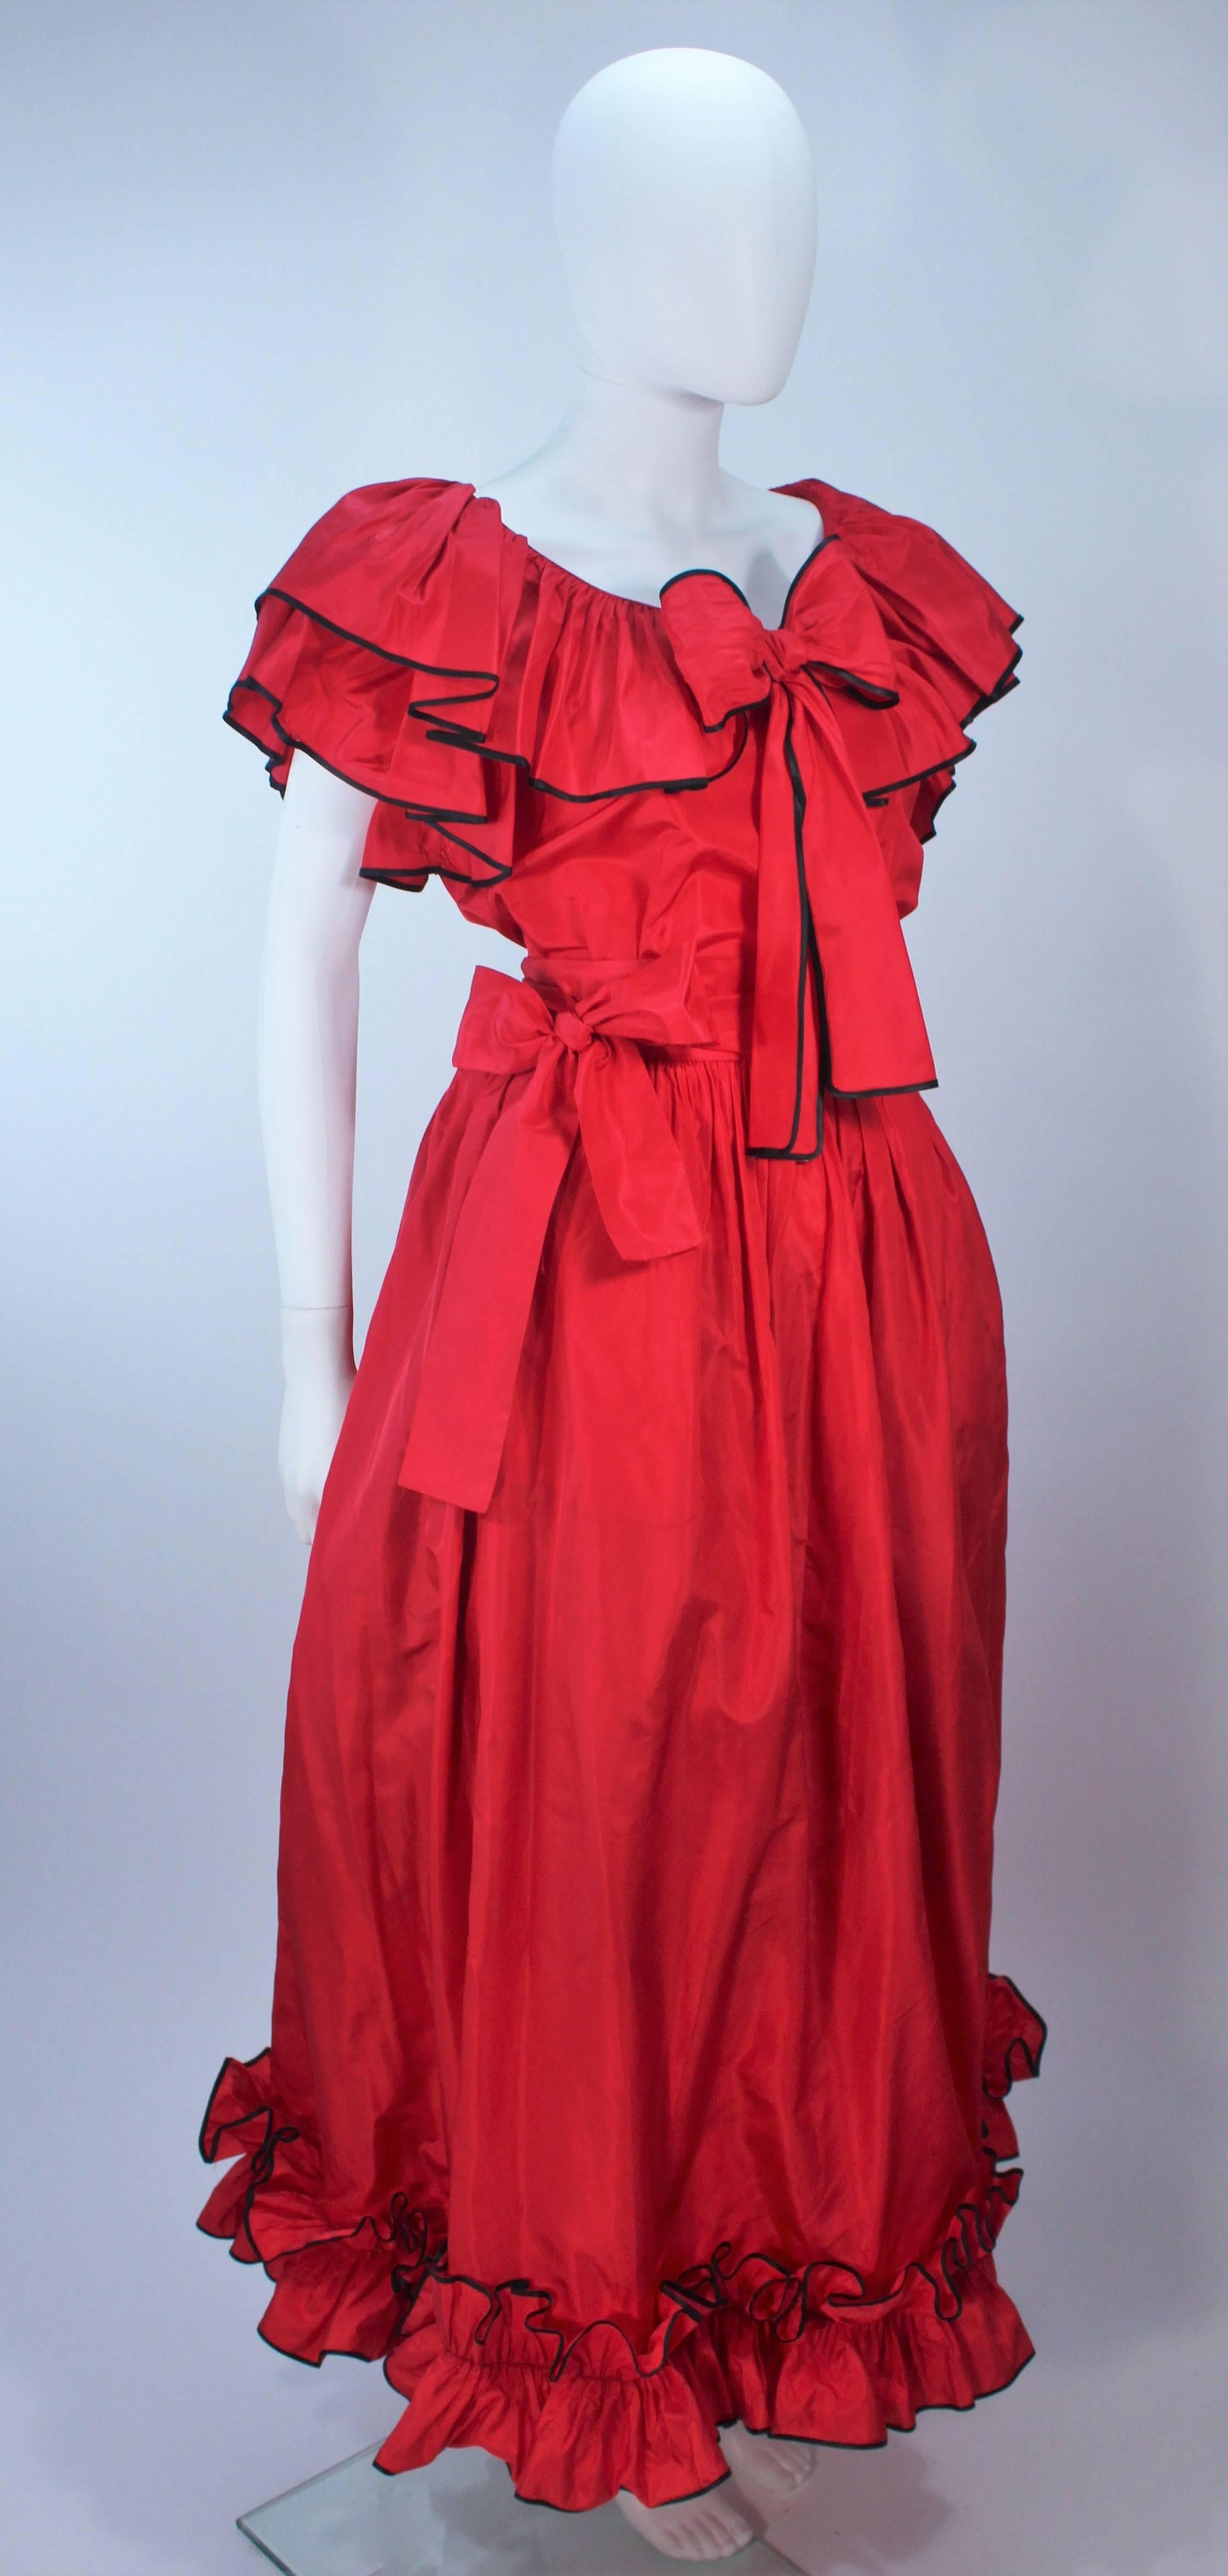 YVES SAINT LAURENT 1970's Red Satin Ruffled Ensemble with Black Trim Size 40 In Excellent Condition For Sale In Los Angeles, CA